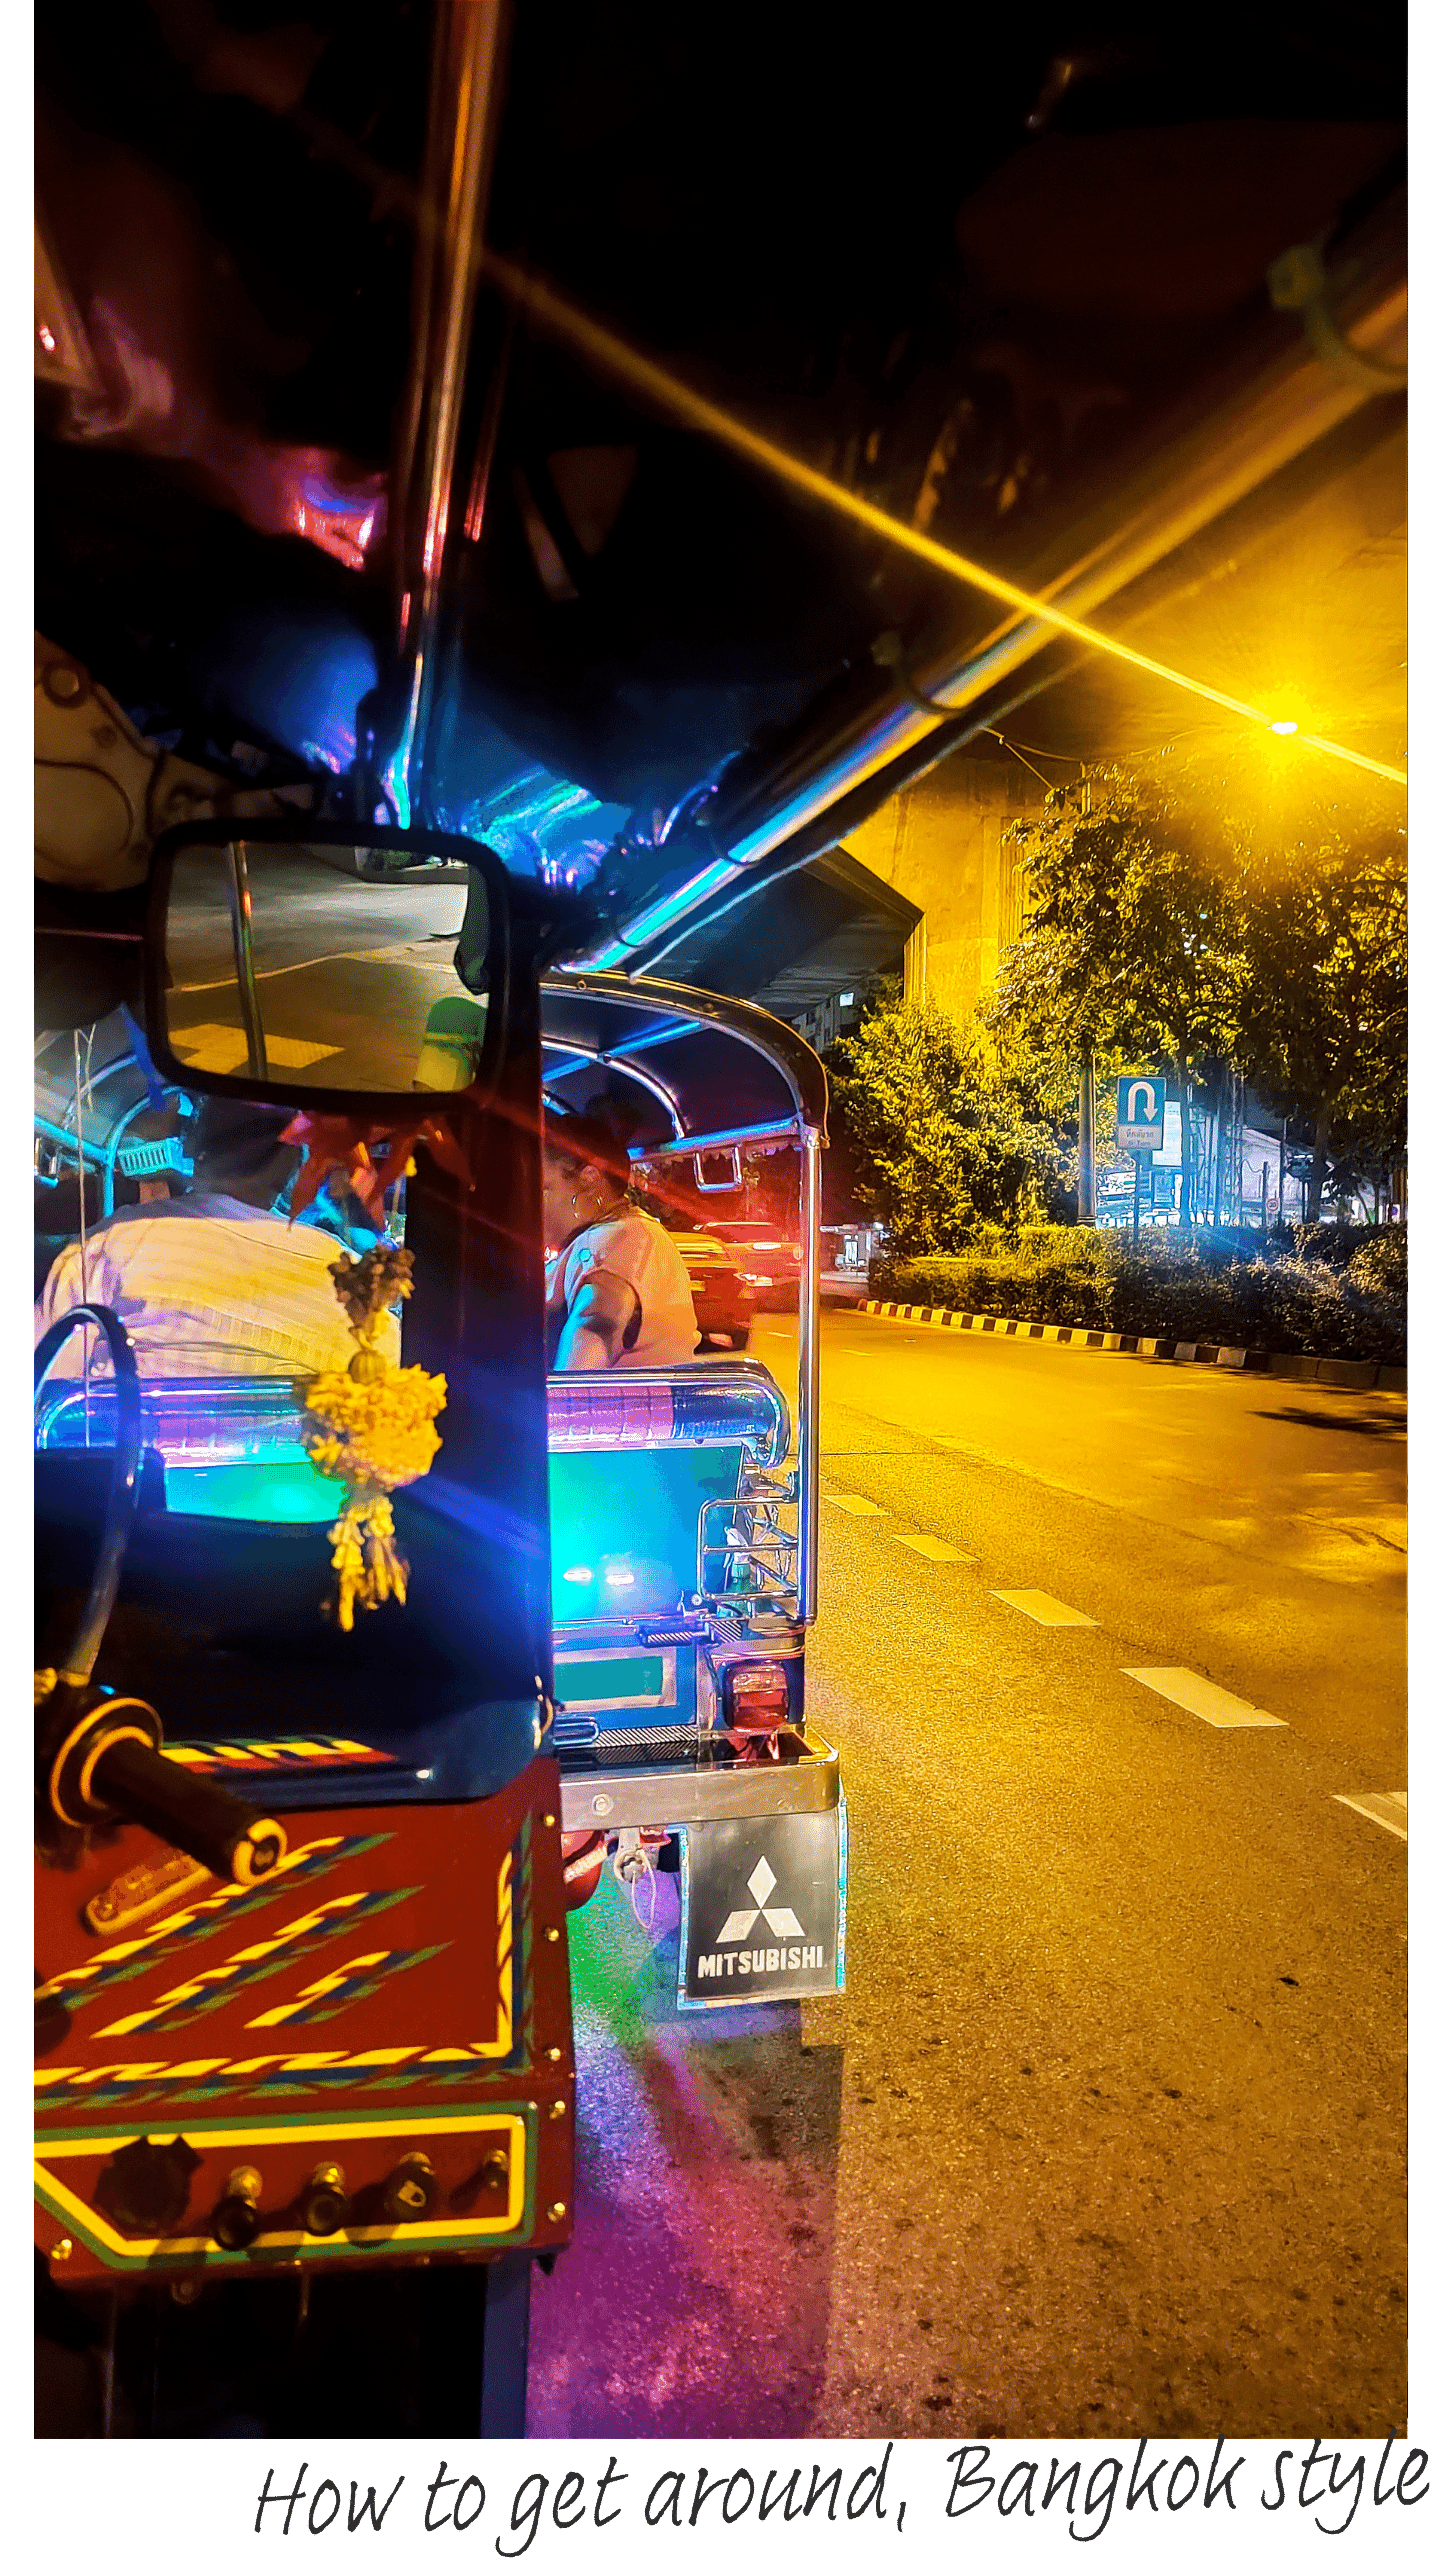 One of the best ways to get around Bangkok is by tuktuk.